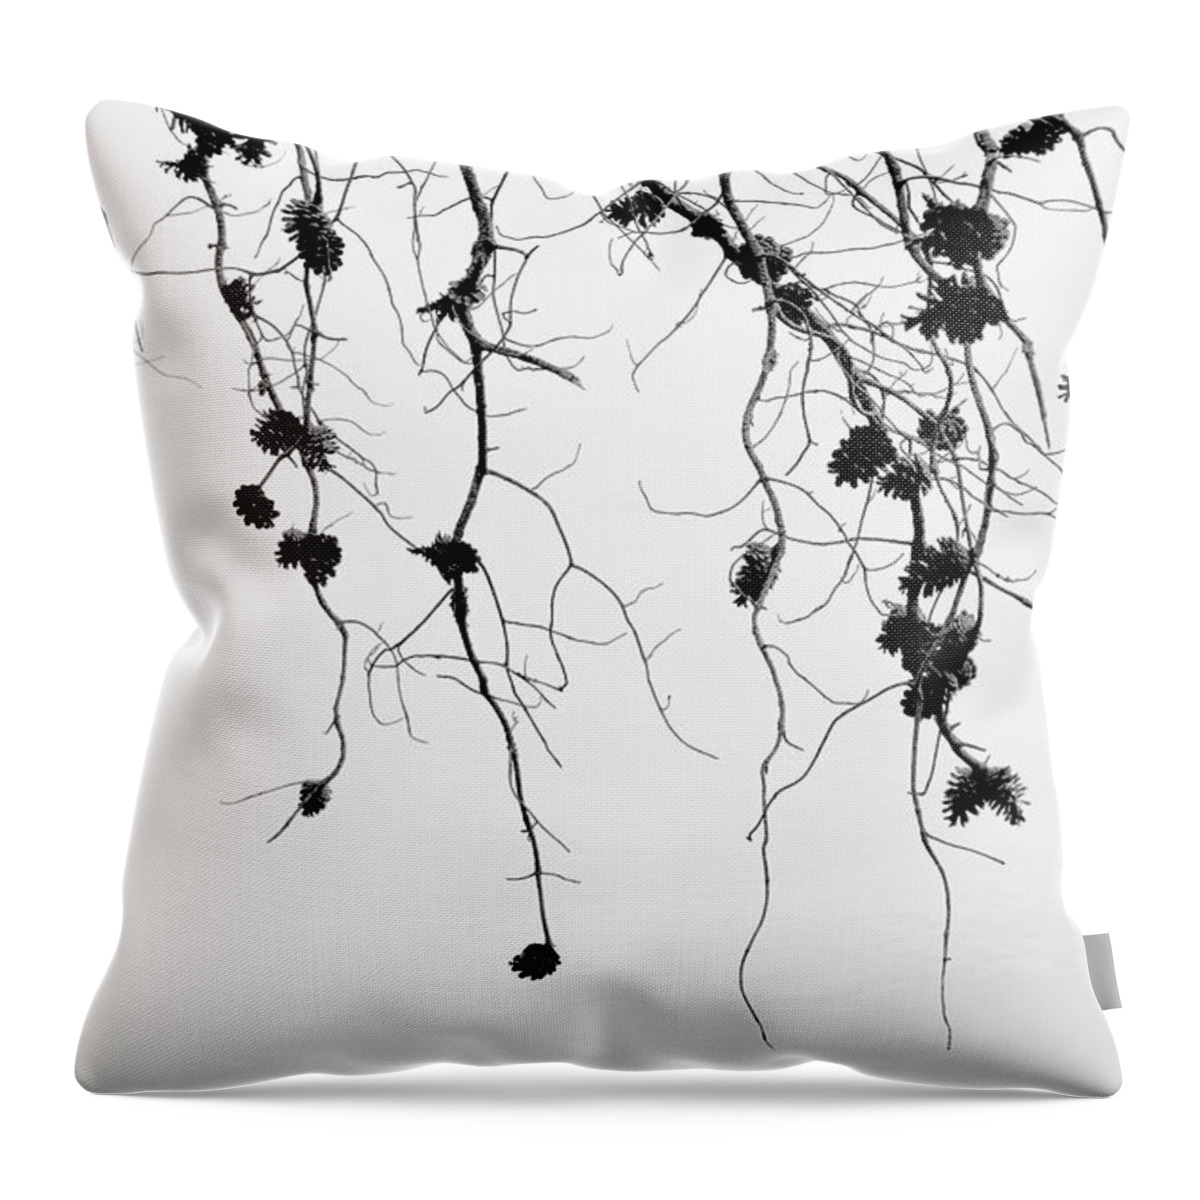 B&w Throw Pillow featuring the photograph Pinecones by Karen Smale